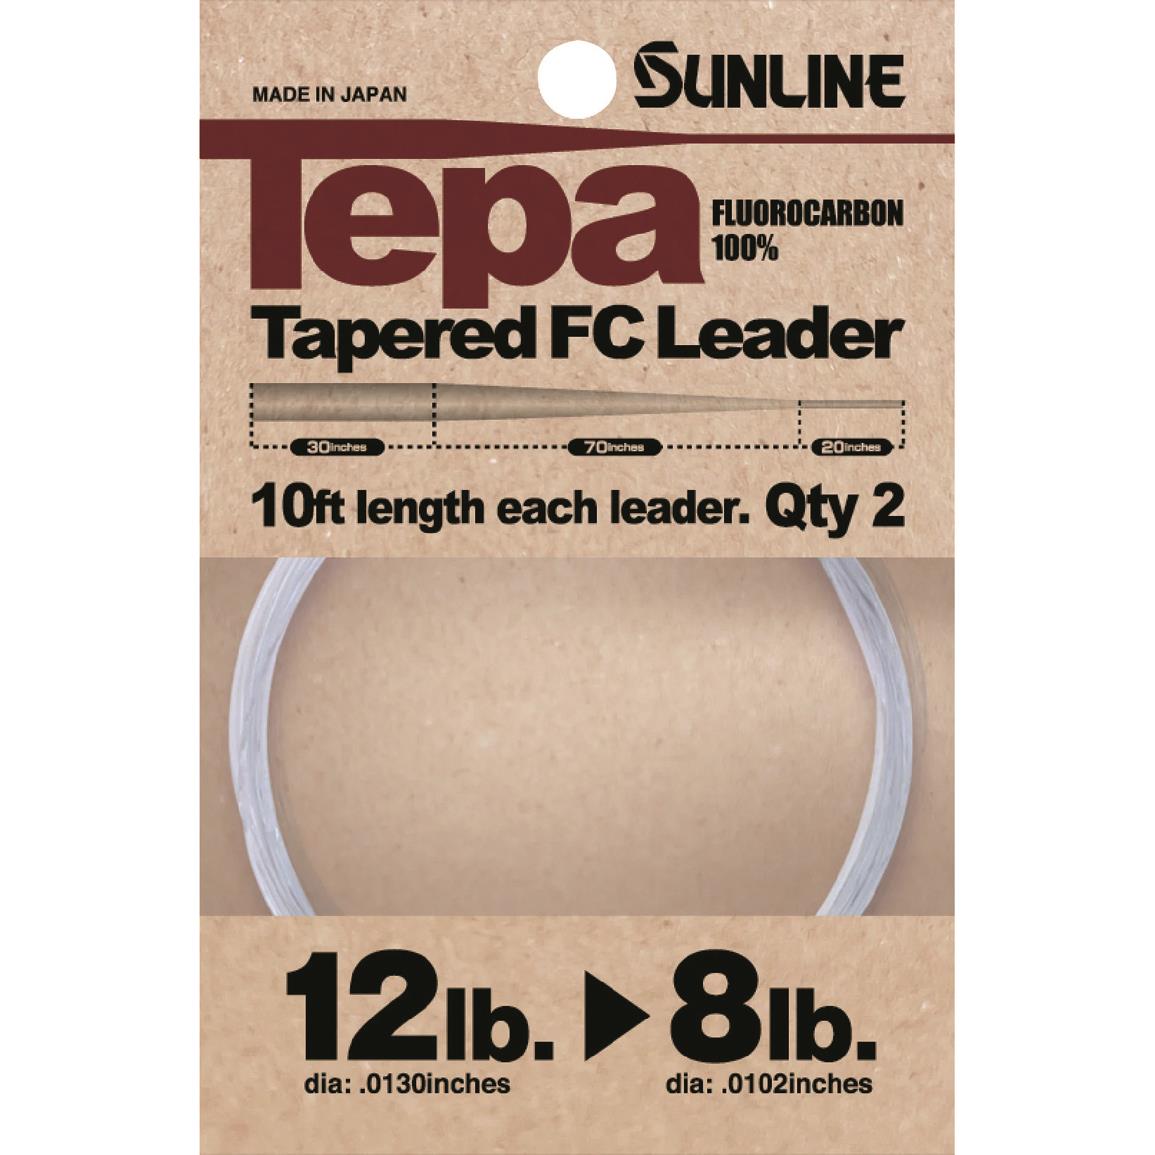 Sunline Tepa Tapered FC Leader 10ft 2pk 12lb to 8lb